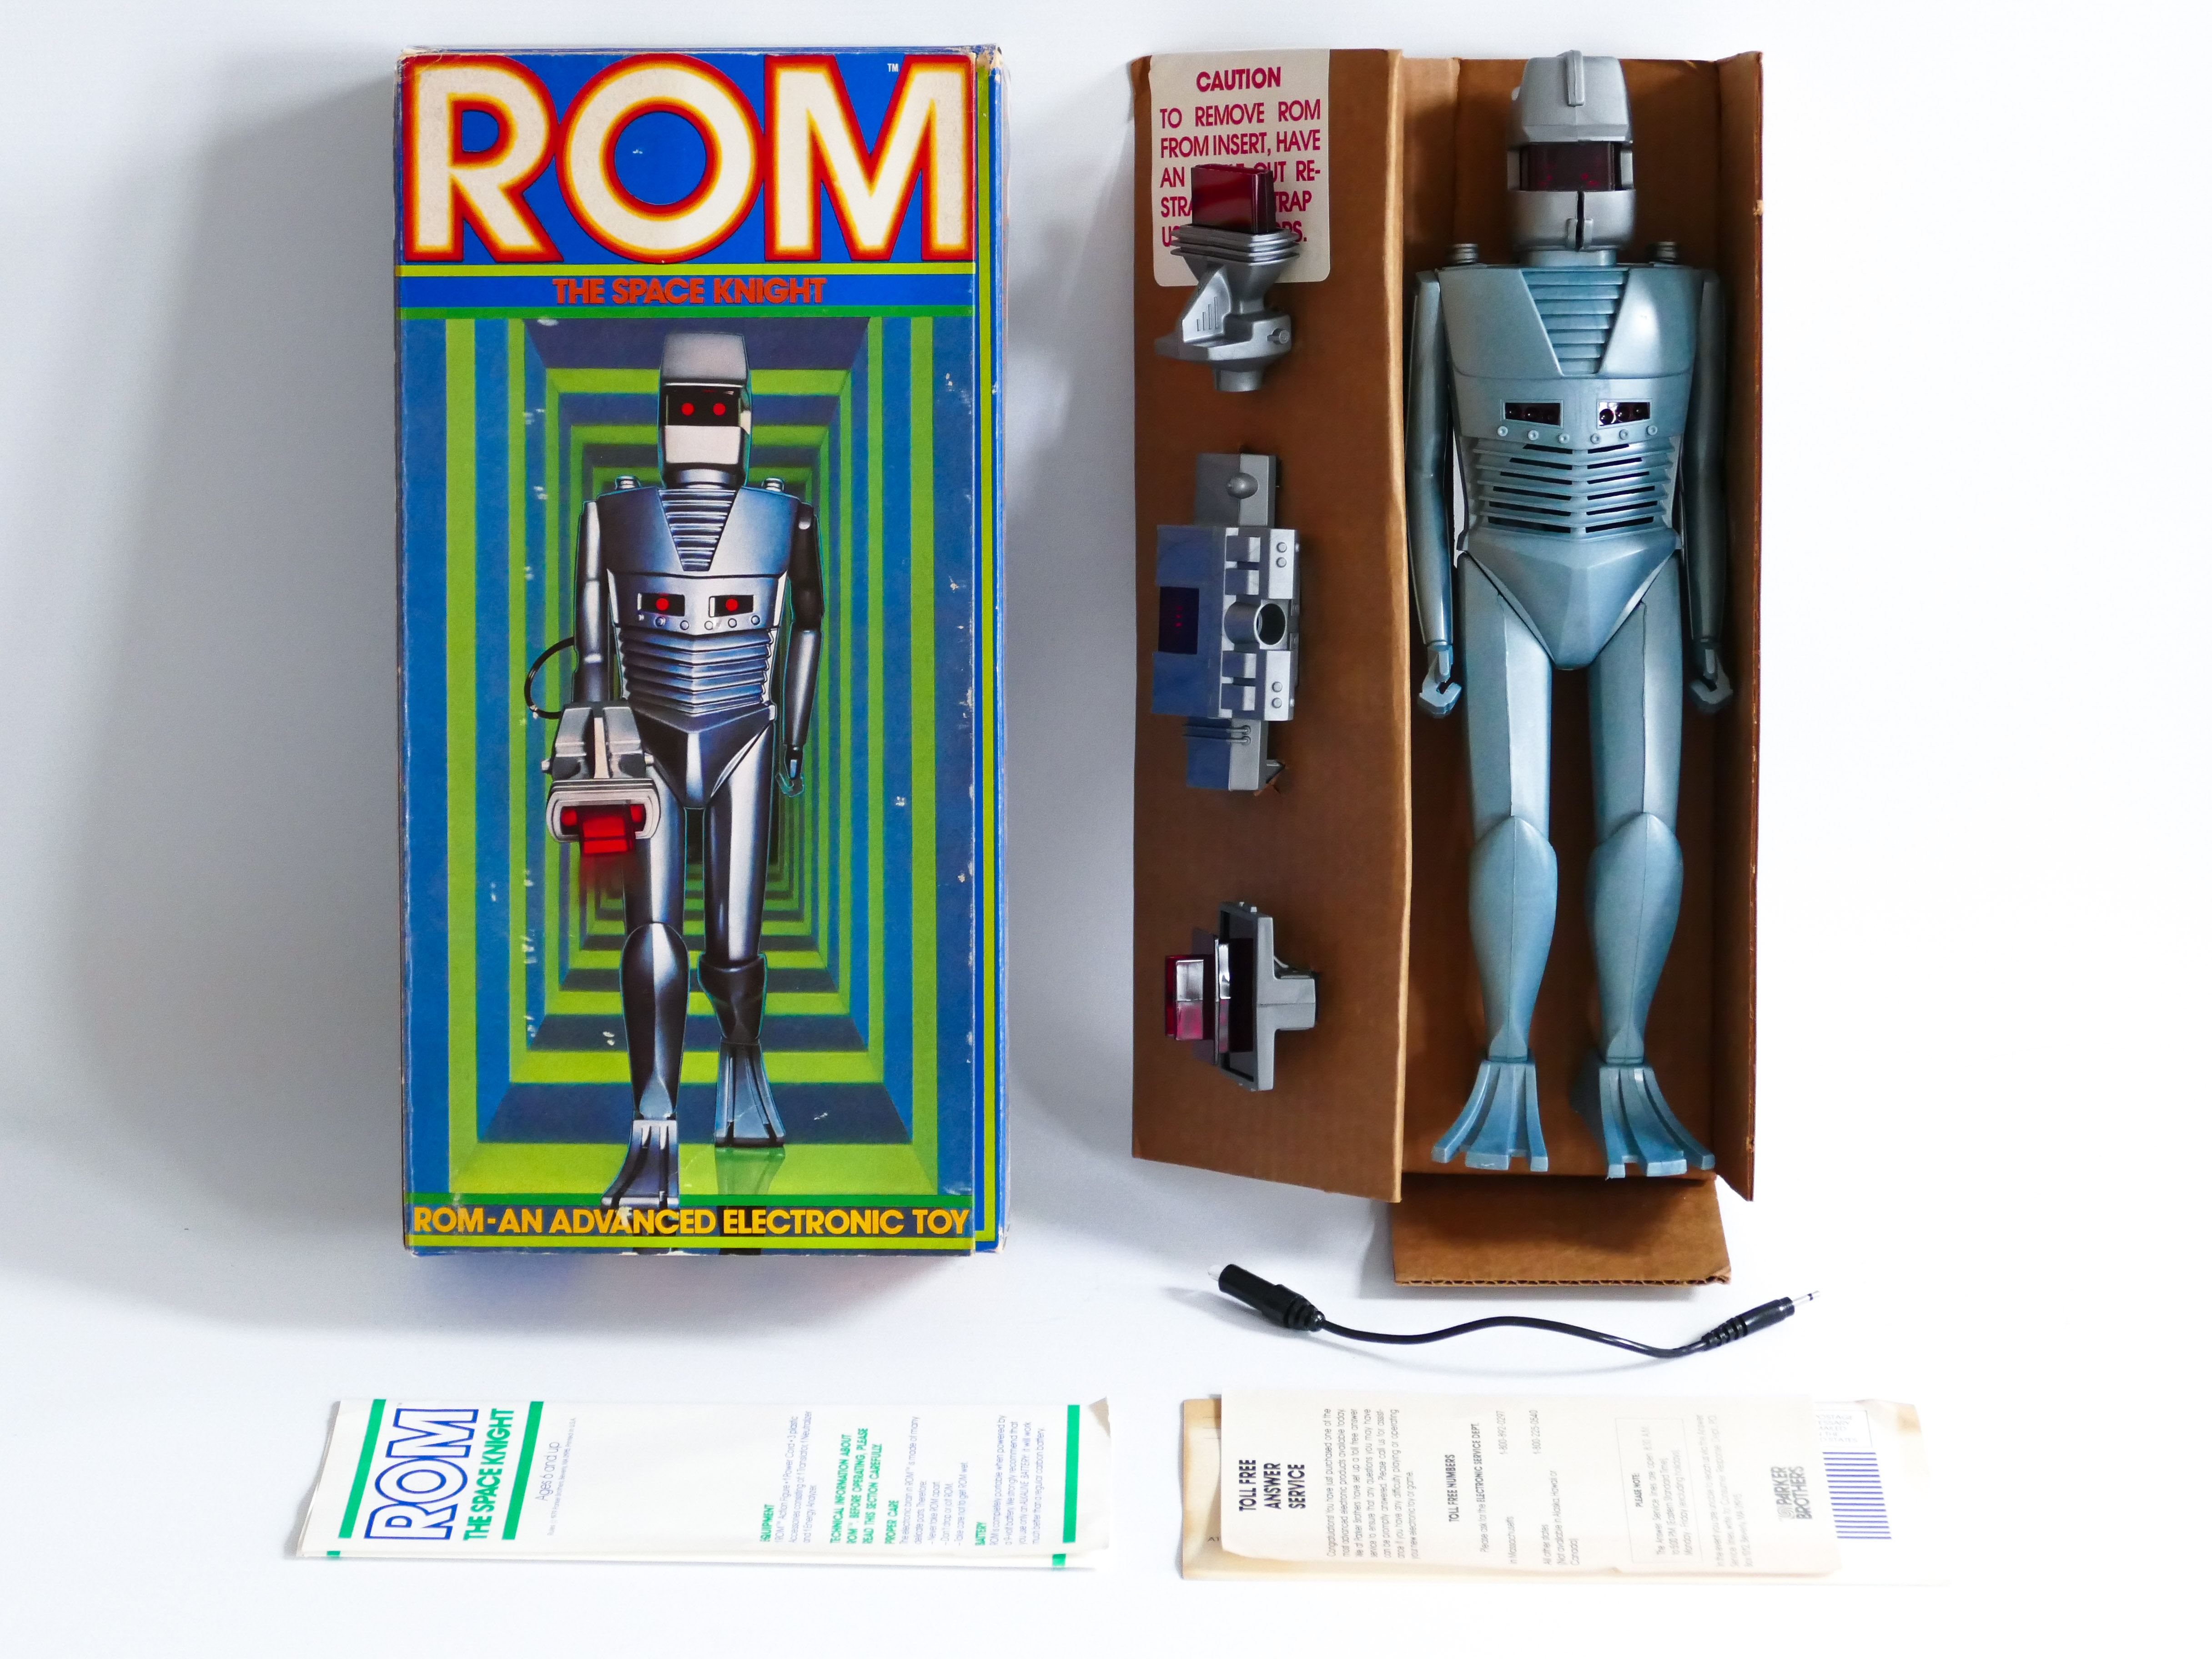 ROM THE SPACE KNIGHT ACTION MAN ELECTRONIC SPACE ROBOT TOY VINTAGE ACTION FIGURE PARKER BROTHERS - Image 2 of 3